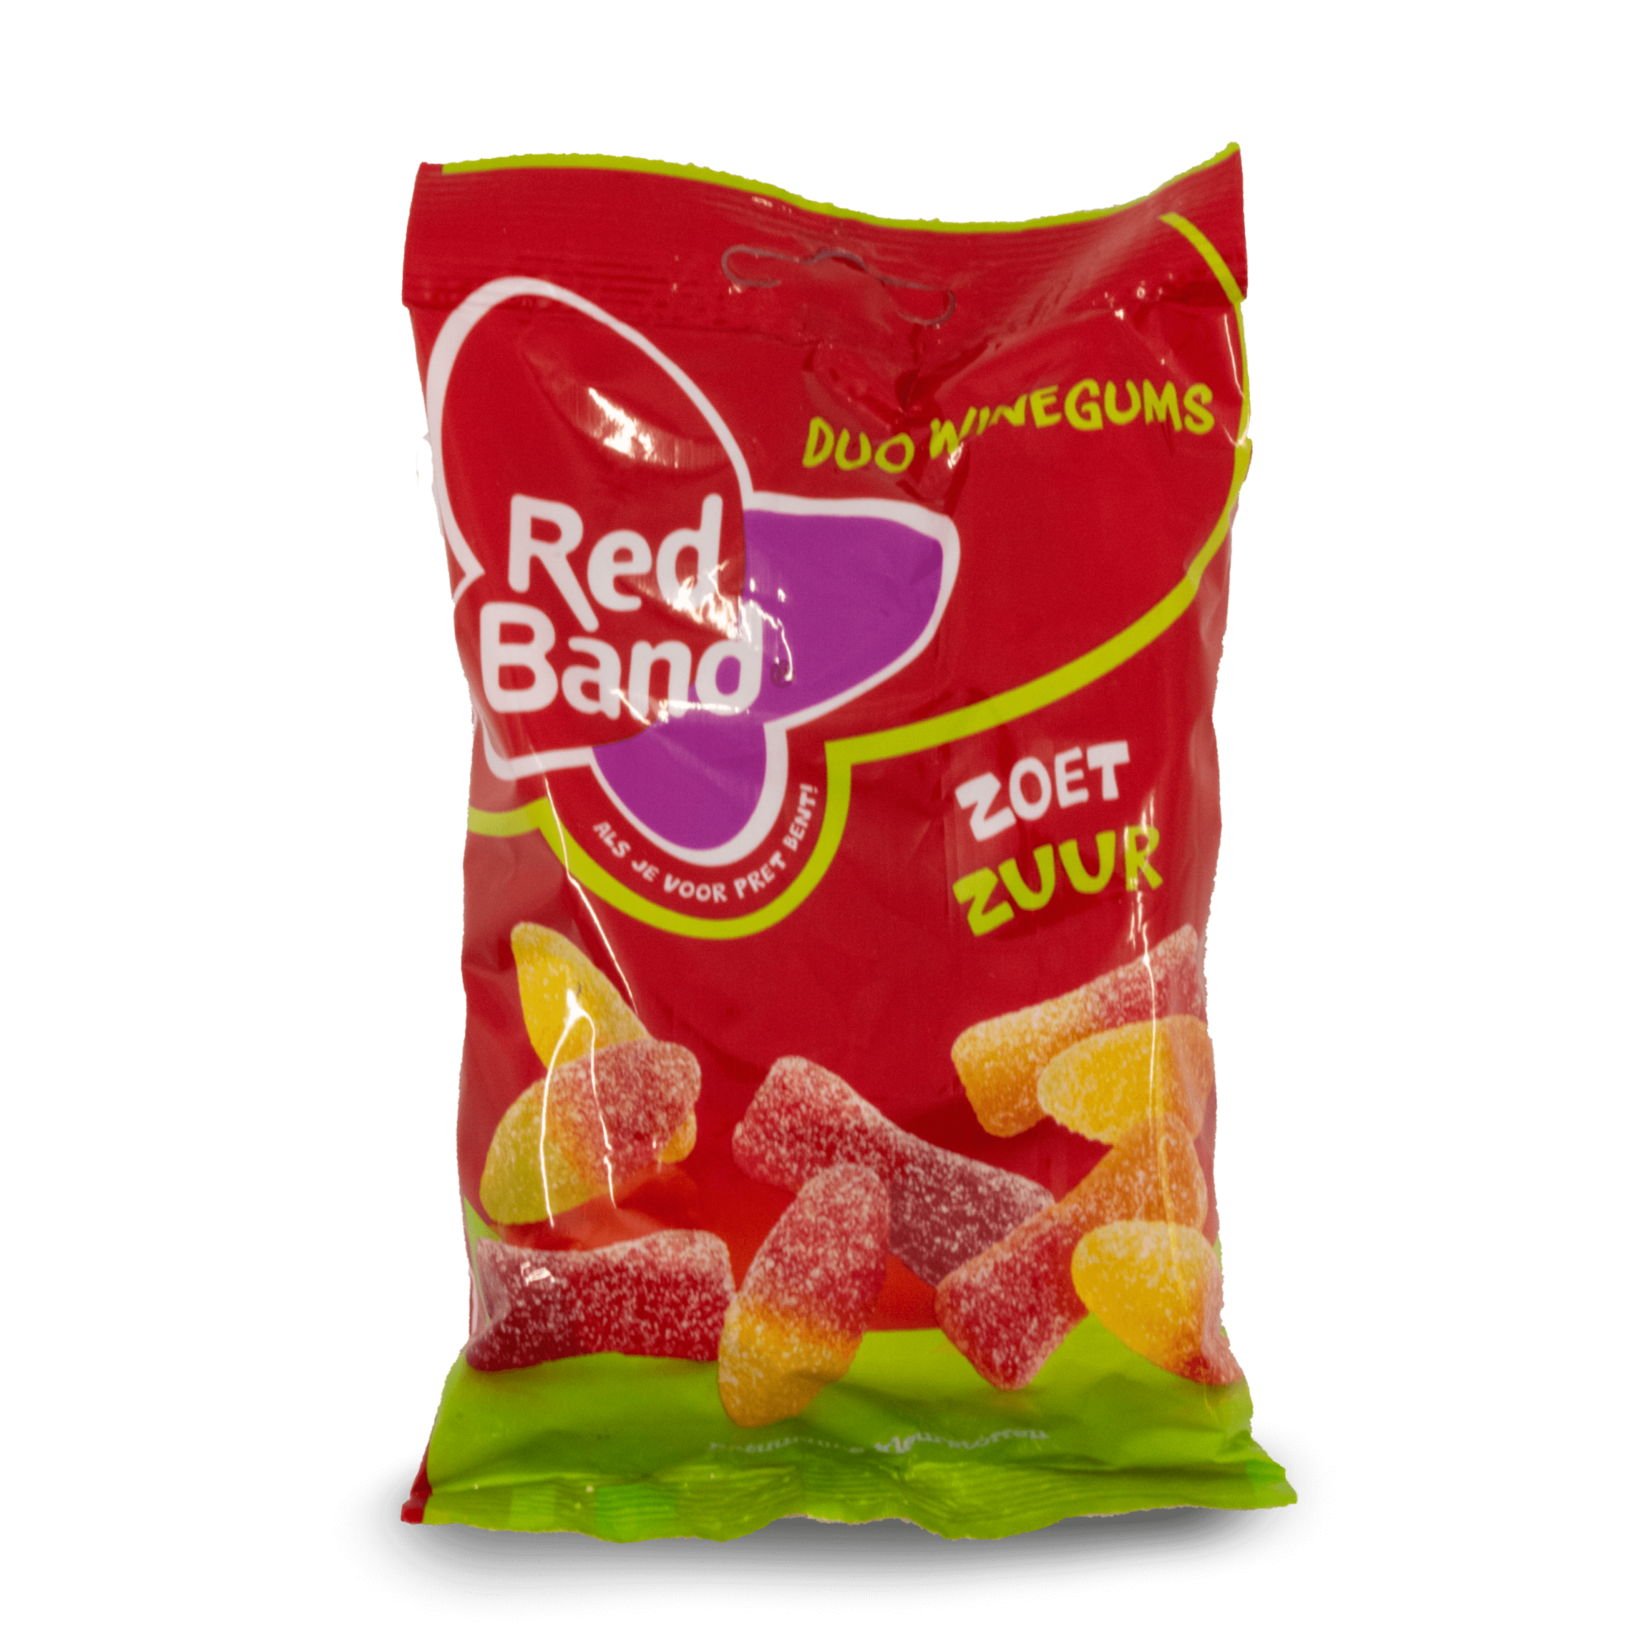 Red Band Red Band Wine Gum Duo Sweet Sour 120g